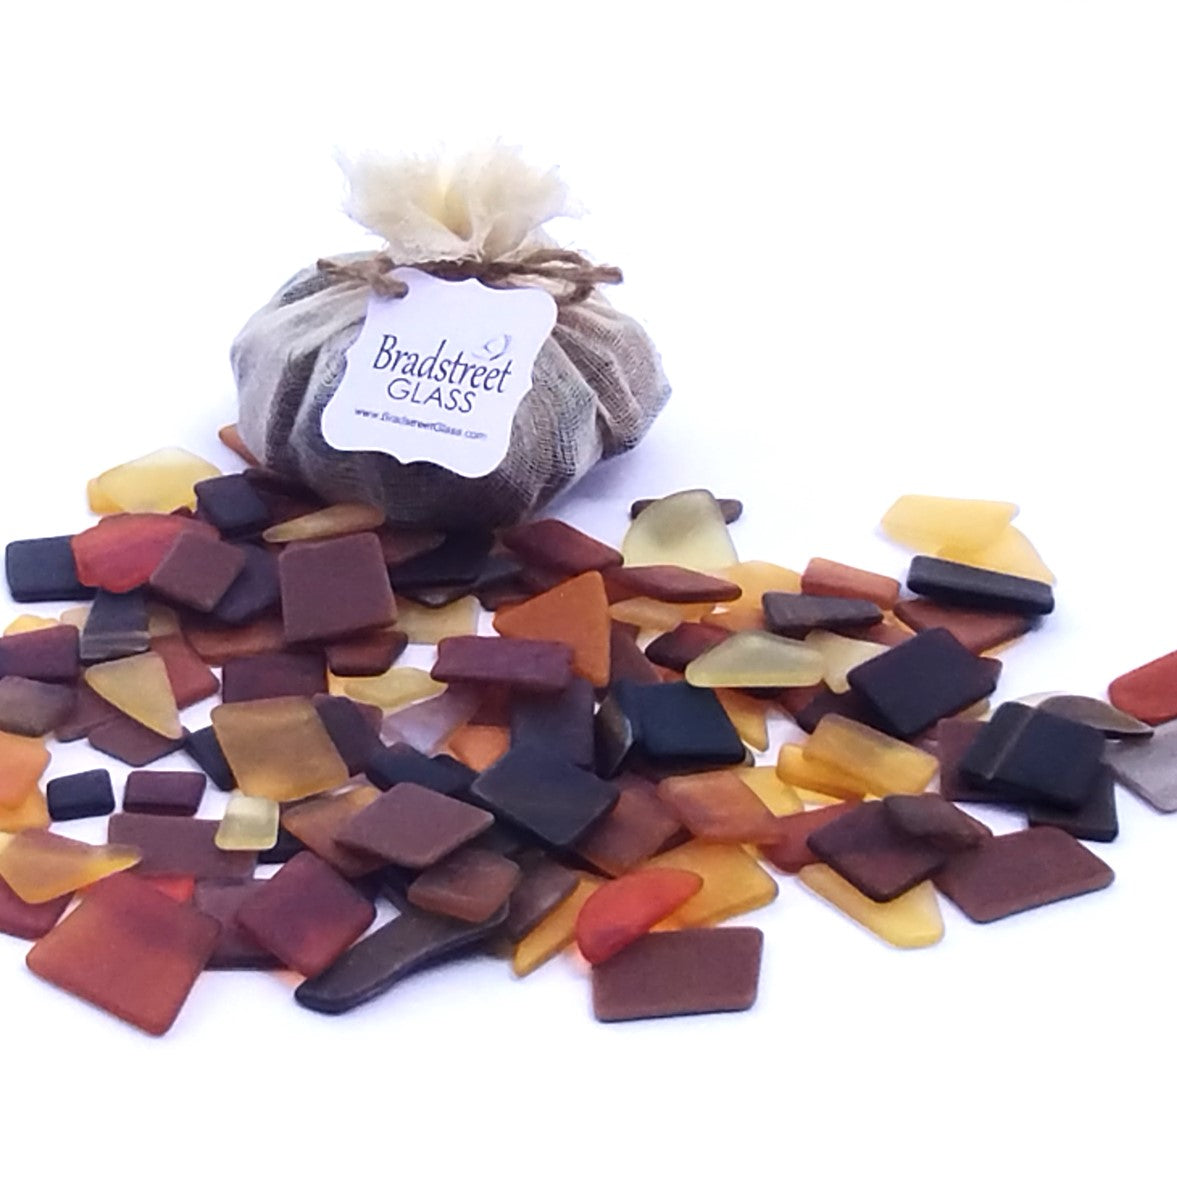 Brown Tumbled Stained Glass 1/2 LB "Sea Glass" Pieces in Shades of Amber Brown